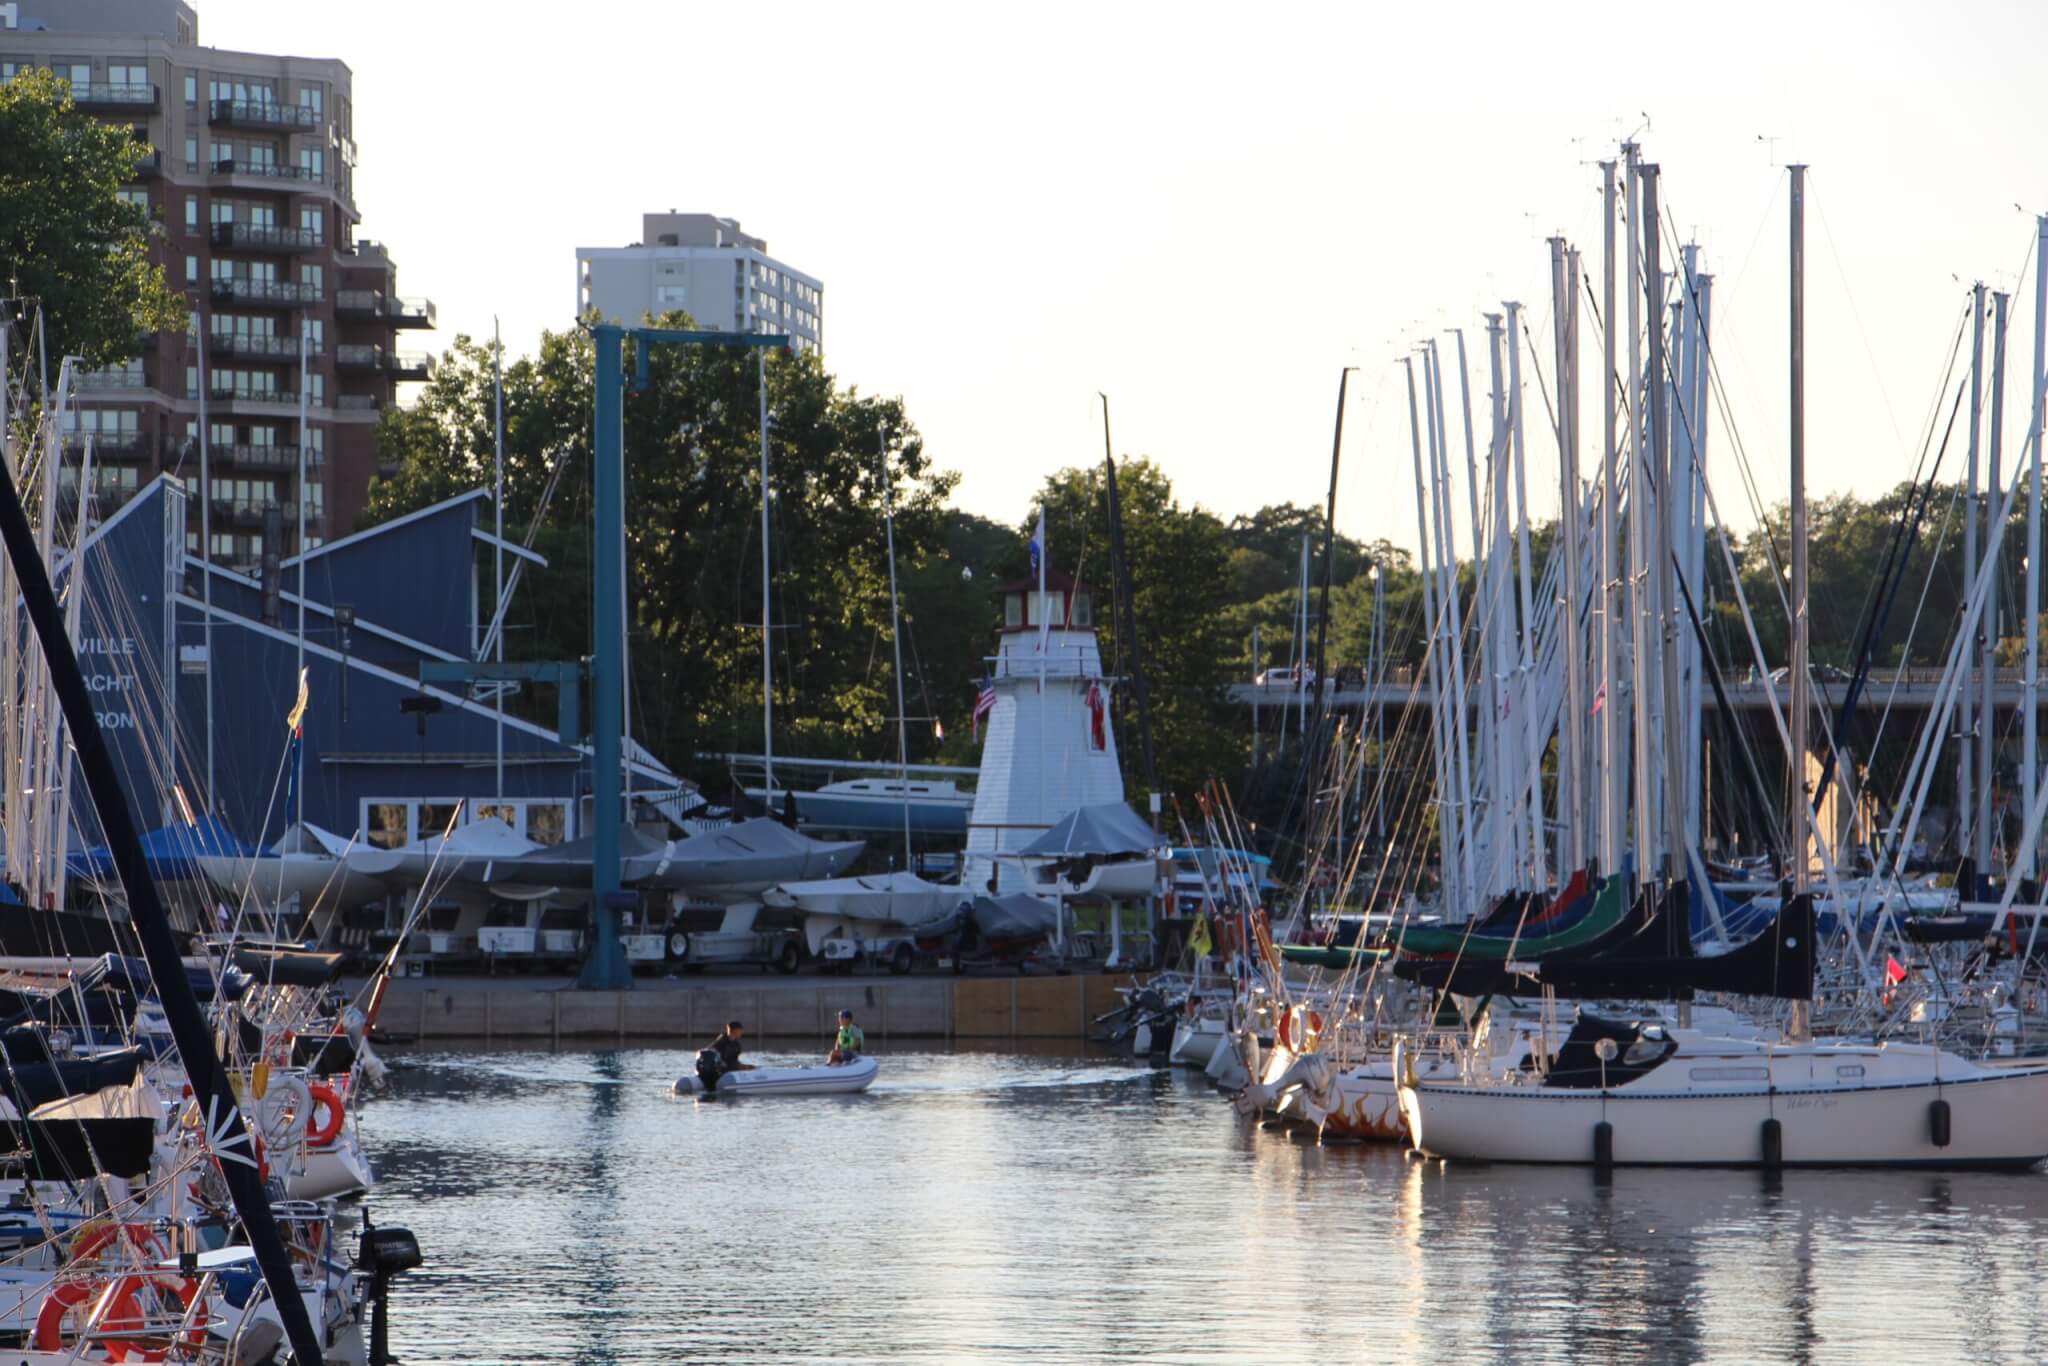 The harbor in Oakville, ON, Canada